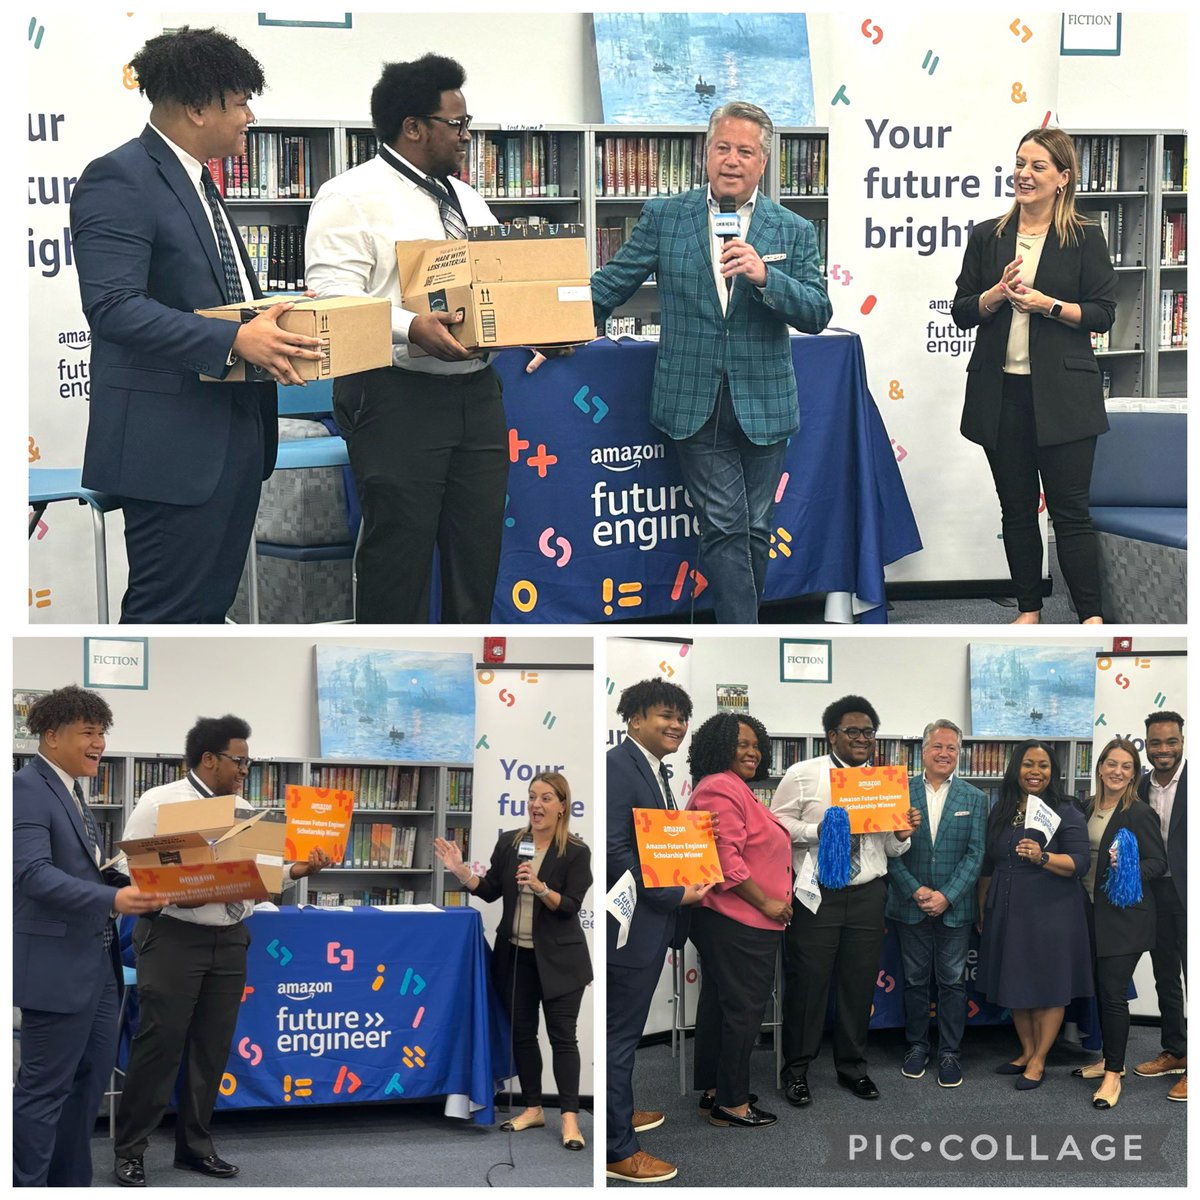 Amazing morning with @amazon honoring two of @browardschools best and brightest students with a $40,000 scholarship! Ervin will be attending @ColumbiaUniver and Christopher will be attending @dartmouth as part of the #AmazonFutureEngineer program. 📚